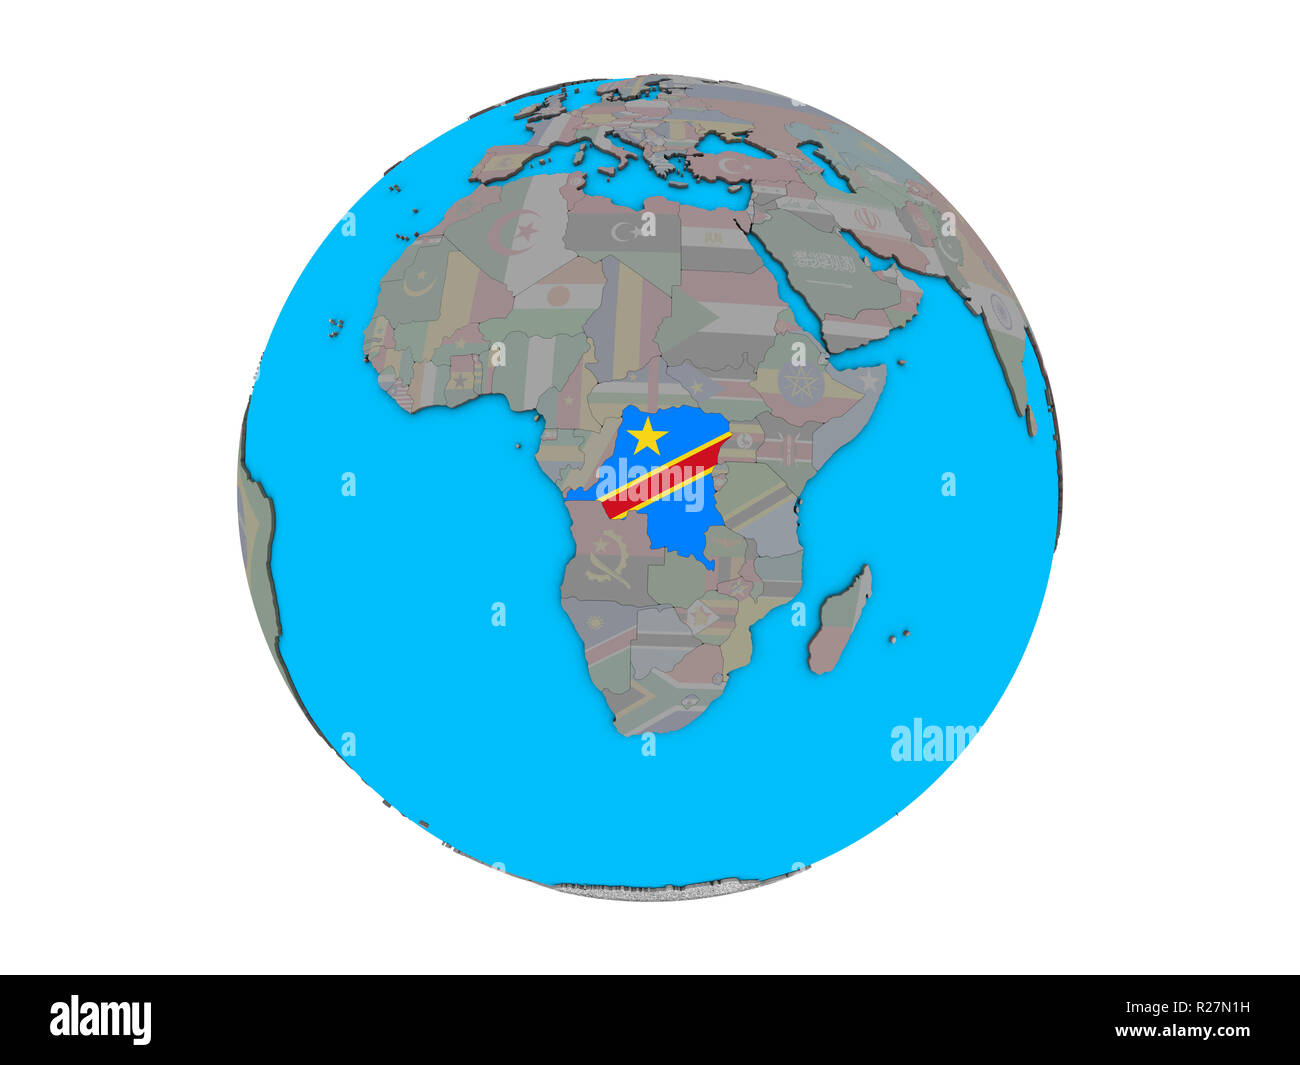 Dem Rep of Congo with embedded national flag on blue political 3D globe. 3D illustration isolated on white background. Stock Photo